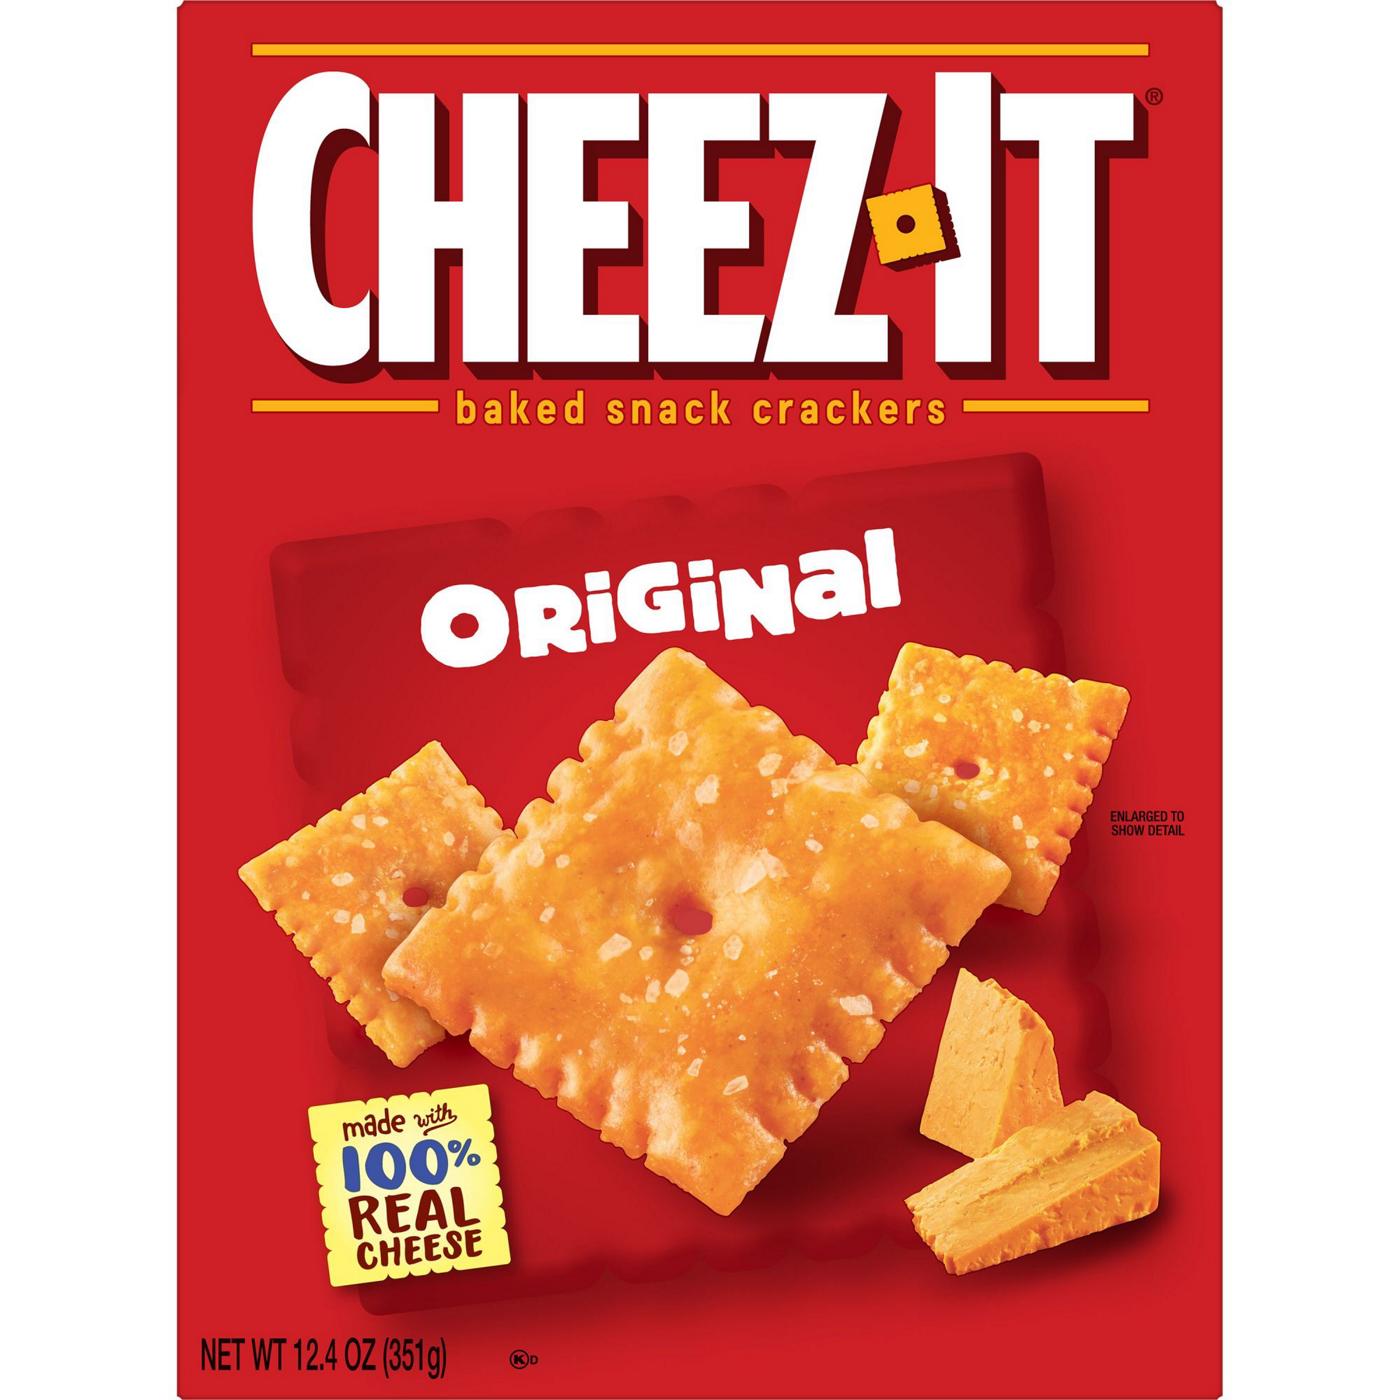 Cheez-It Original Cheese Crackers; image 1 of 2